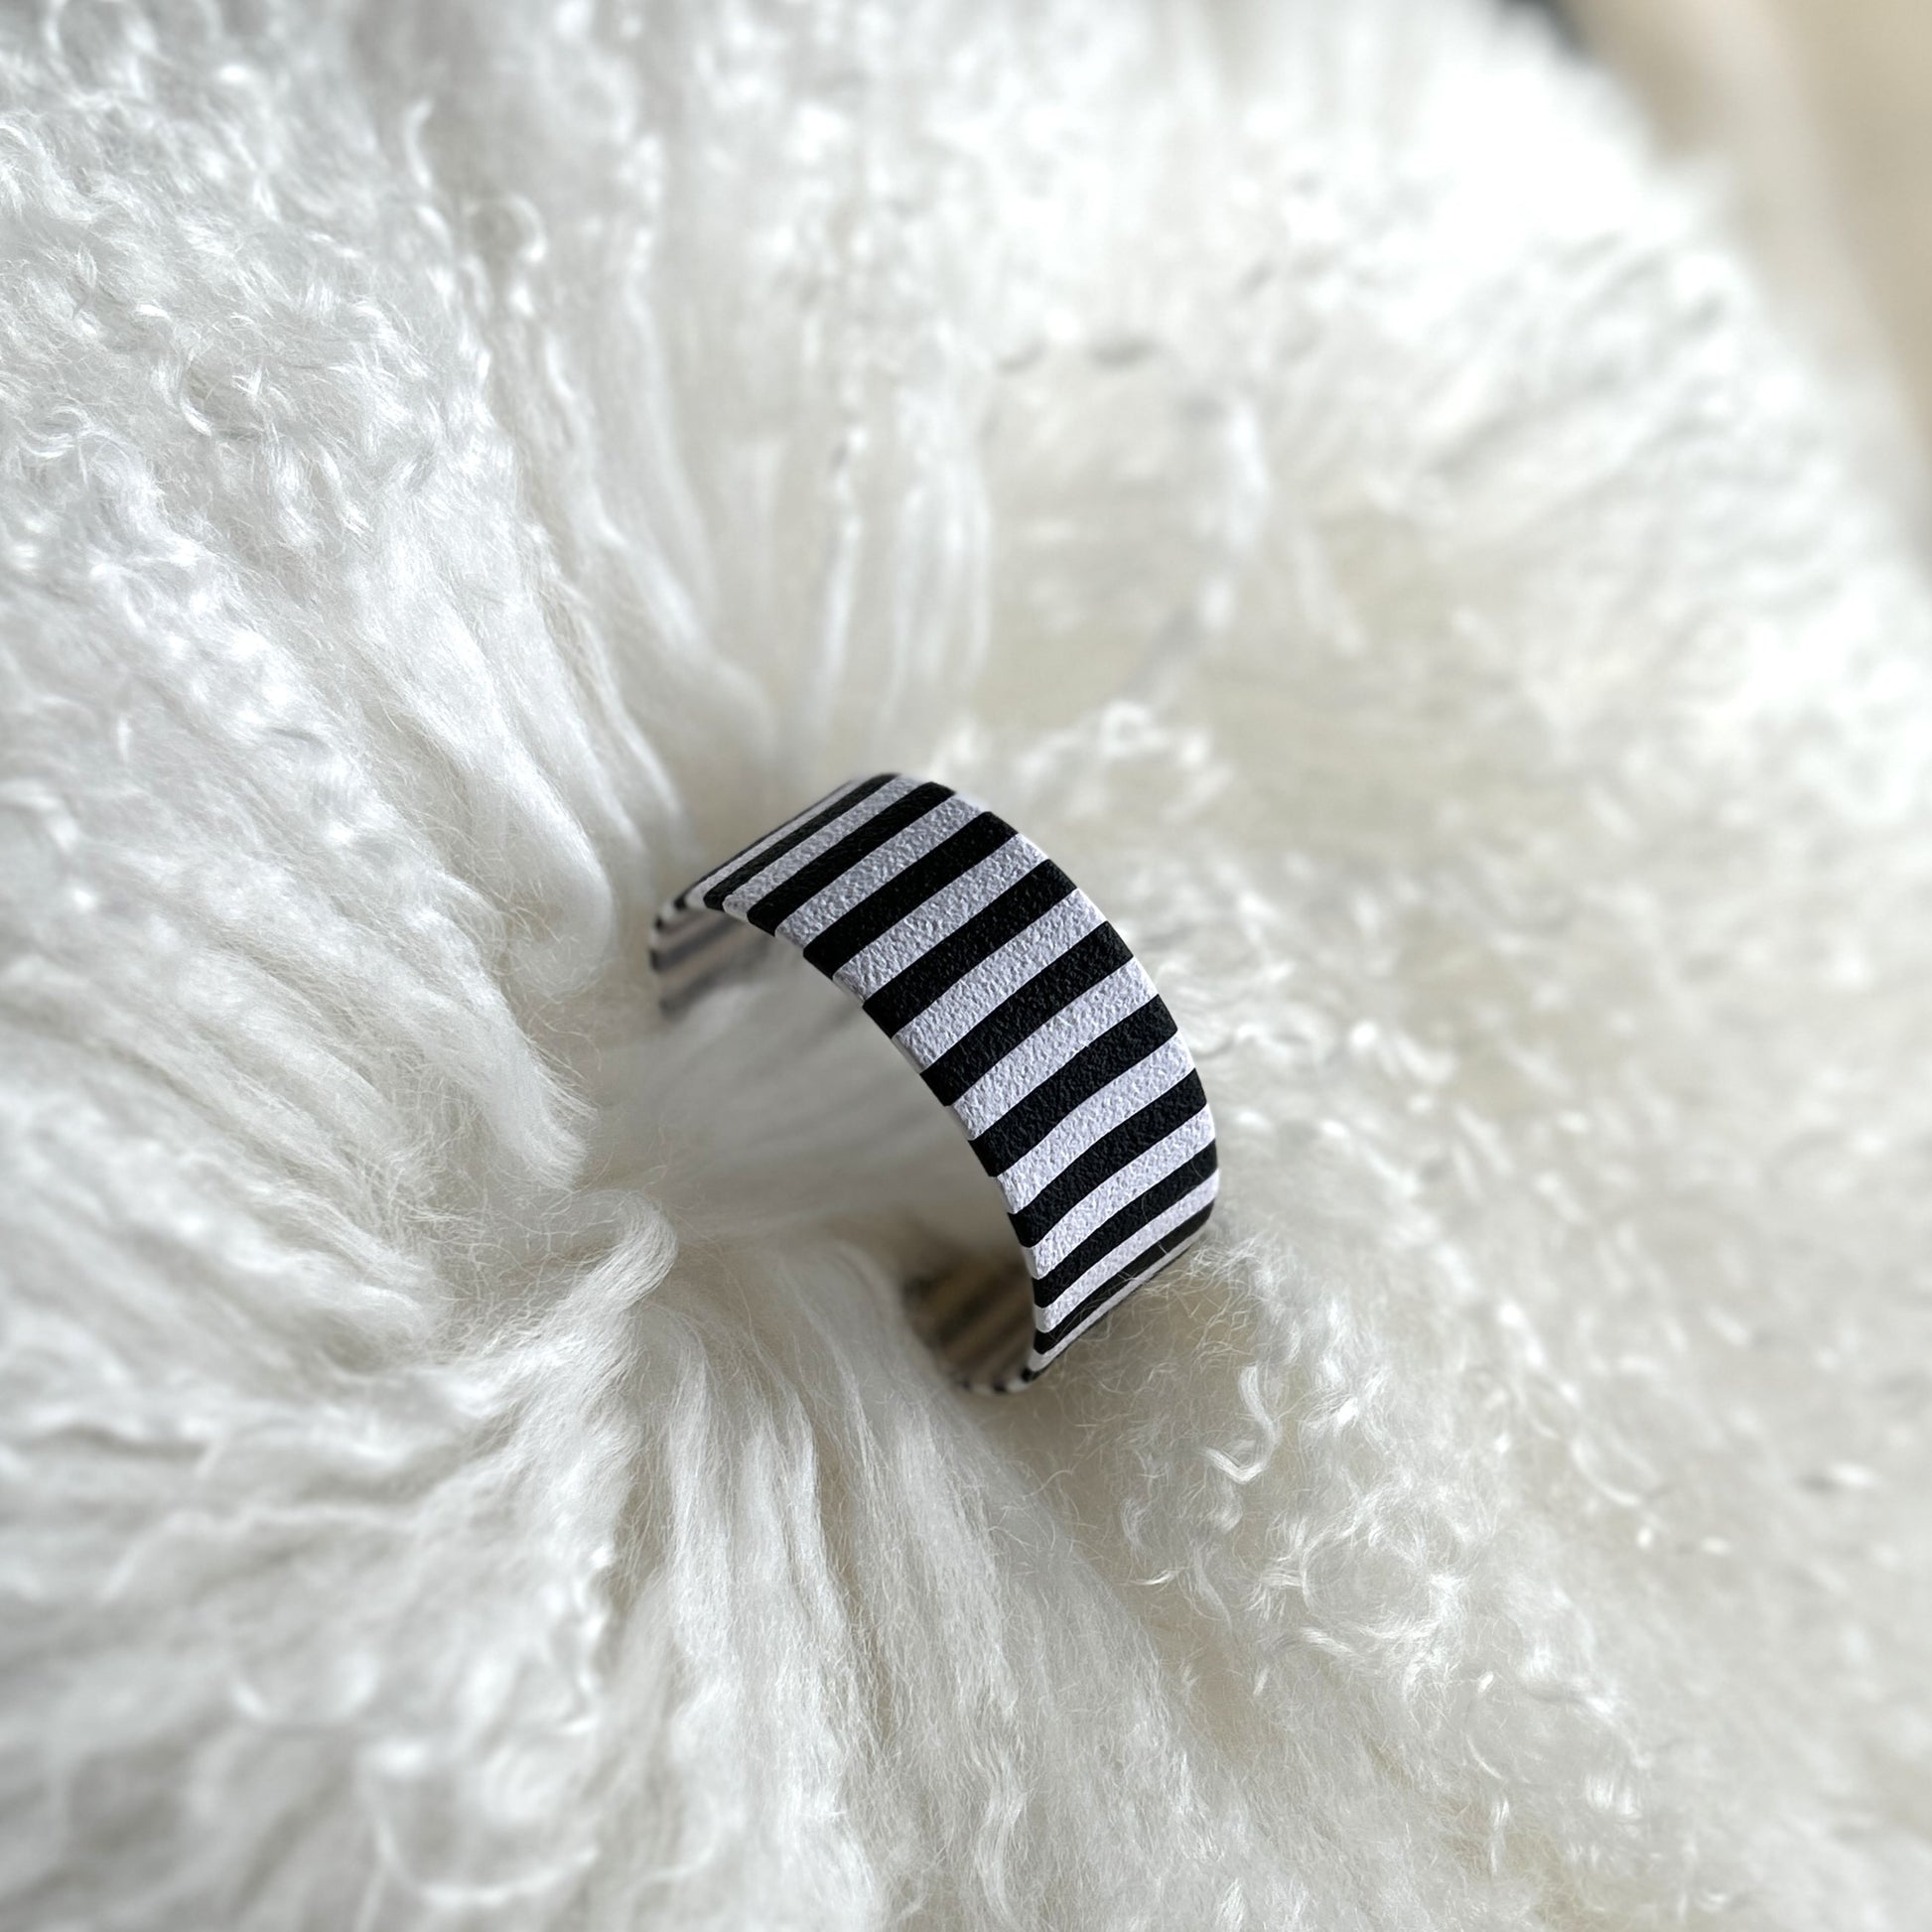 Black and White Cuff Bangle Bracelet Handmade by Ollimay and Co